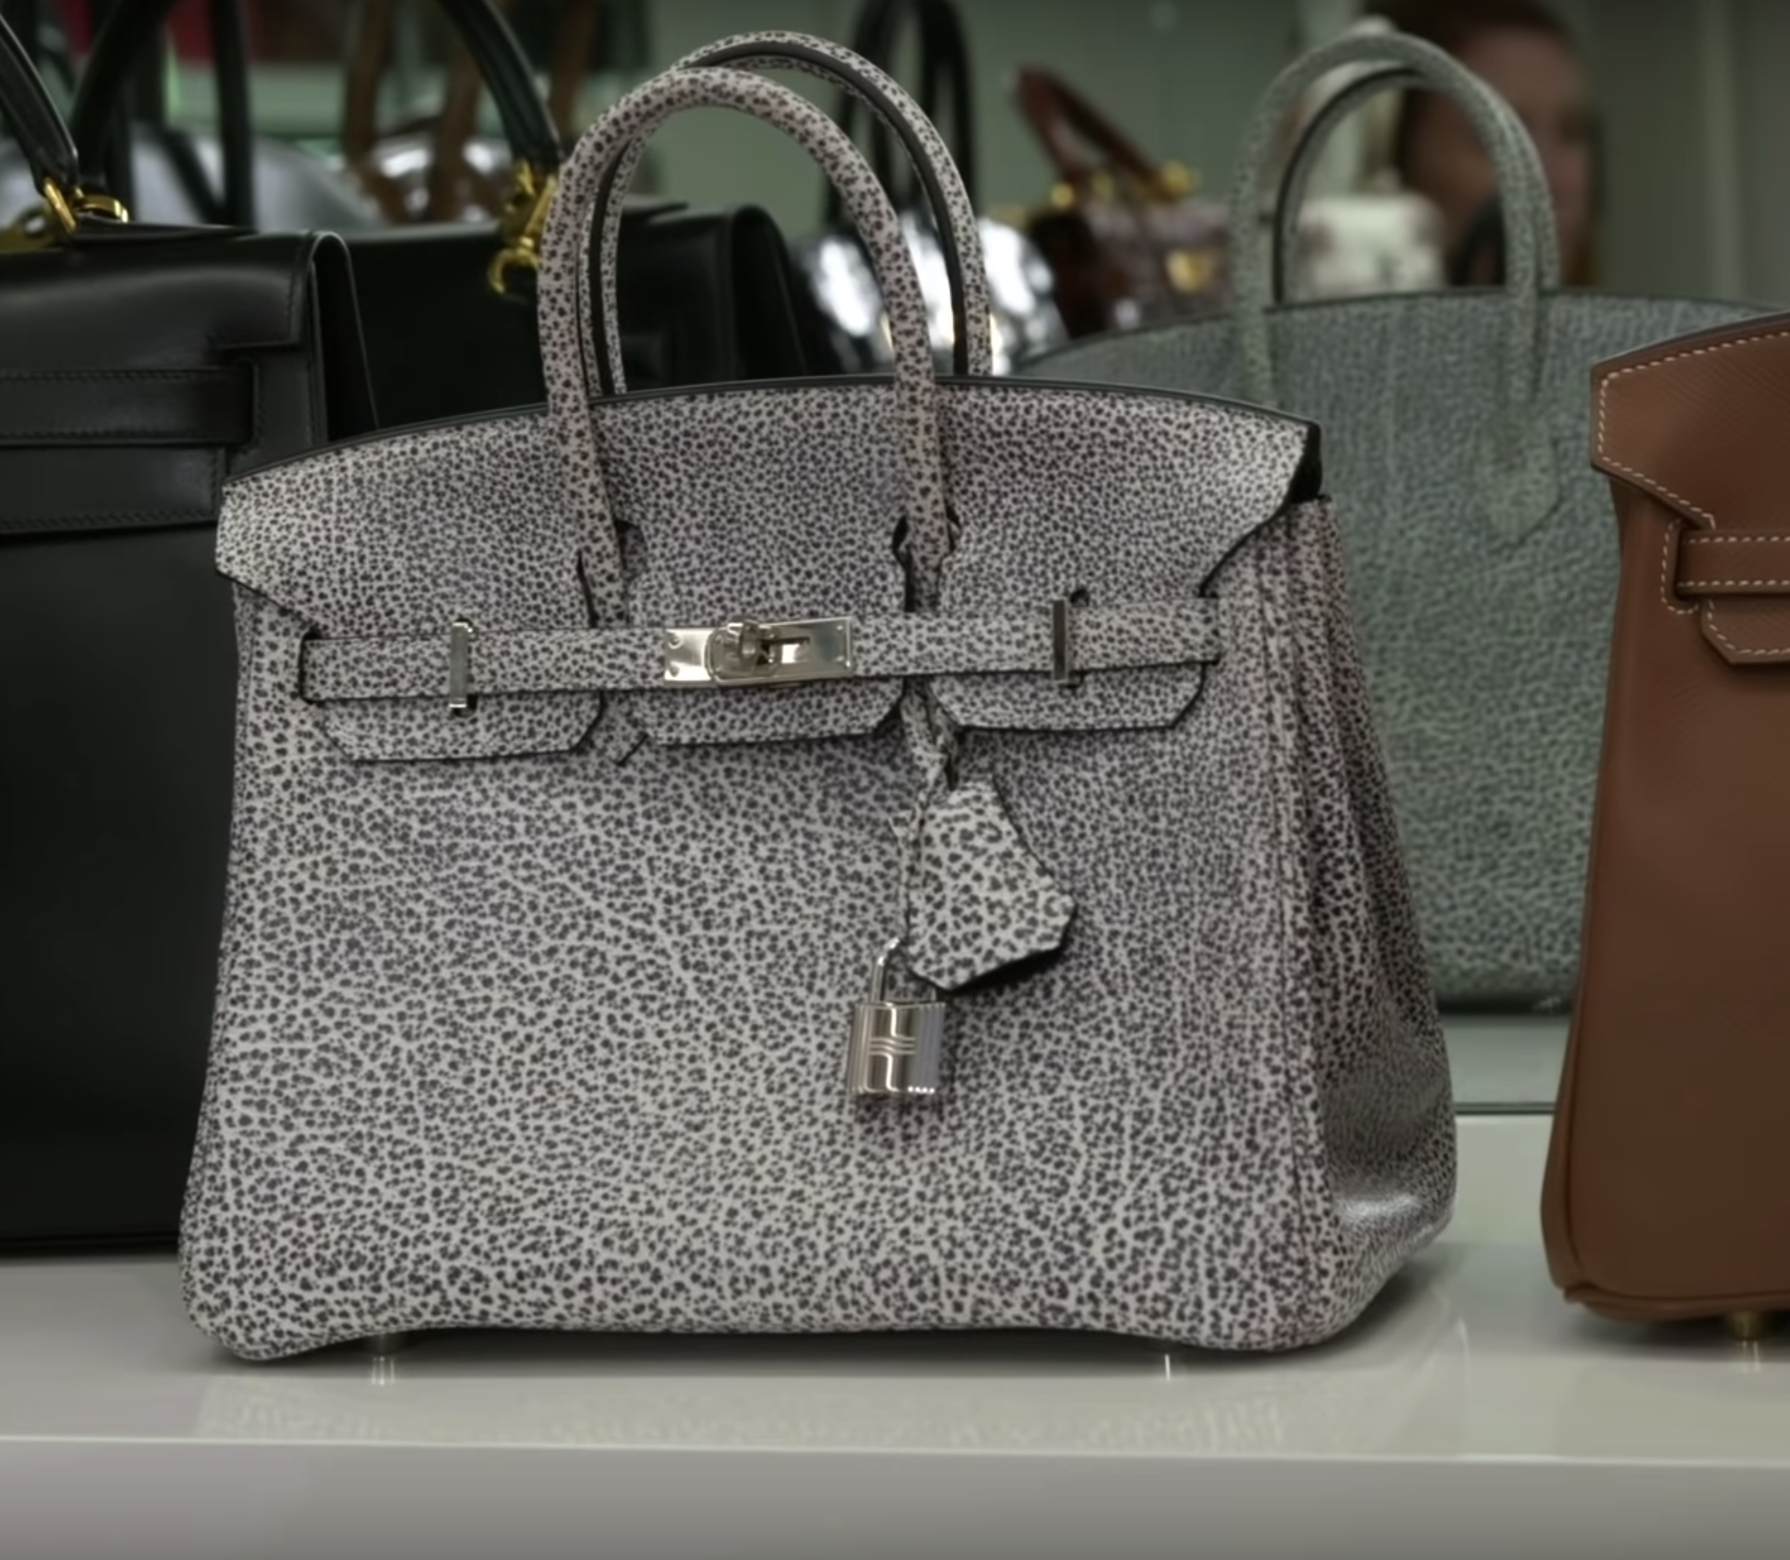 Hermes Tool Box large model weekend bag in grey Graphite Swift leather,  Boots & Her Hermès Bag – Rvce News, Kylie Jenner Stuns In A Grey Leather  Trench